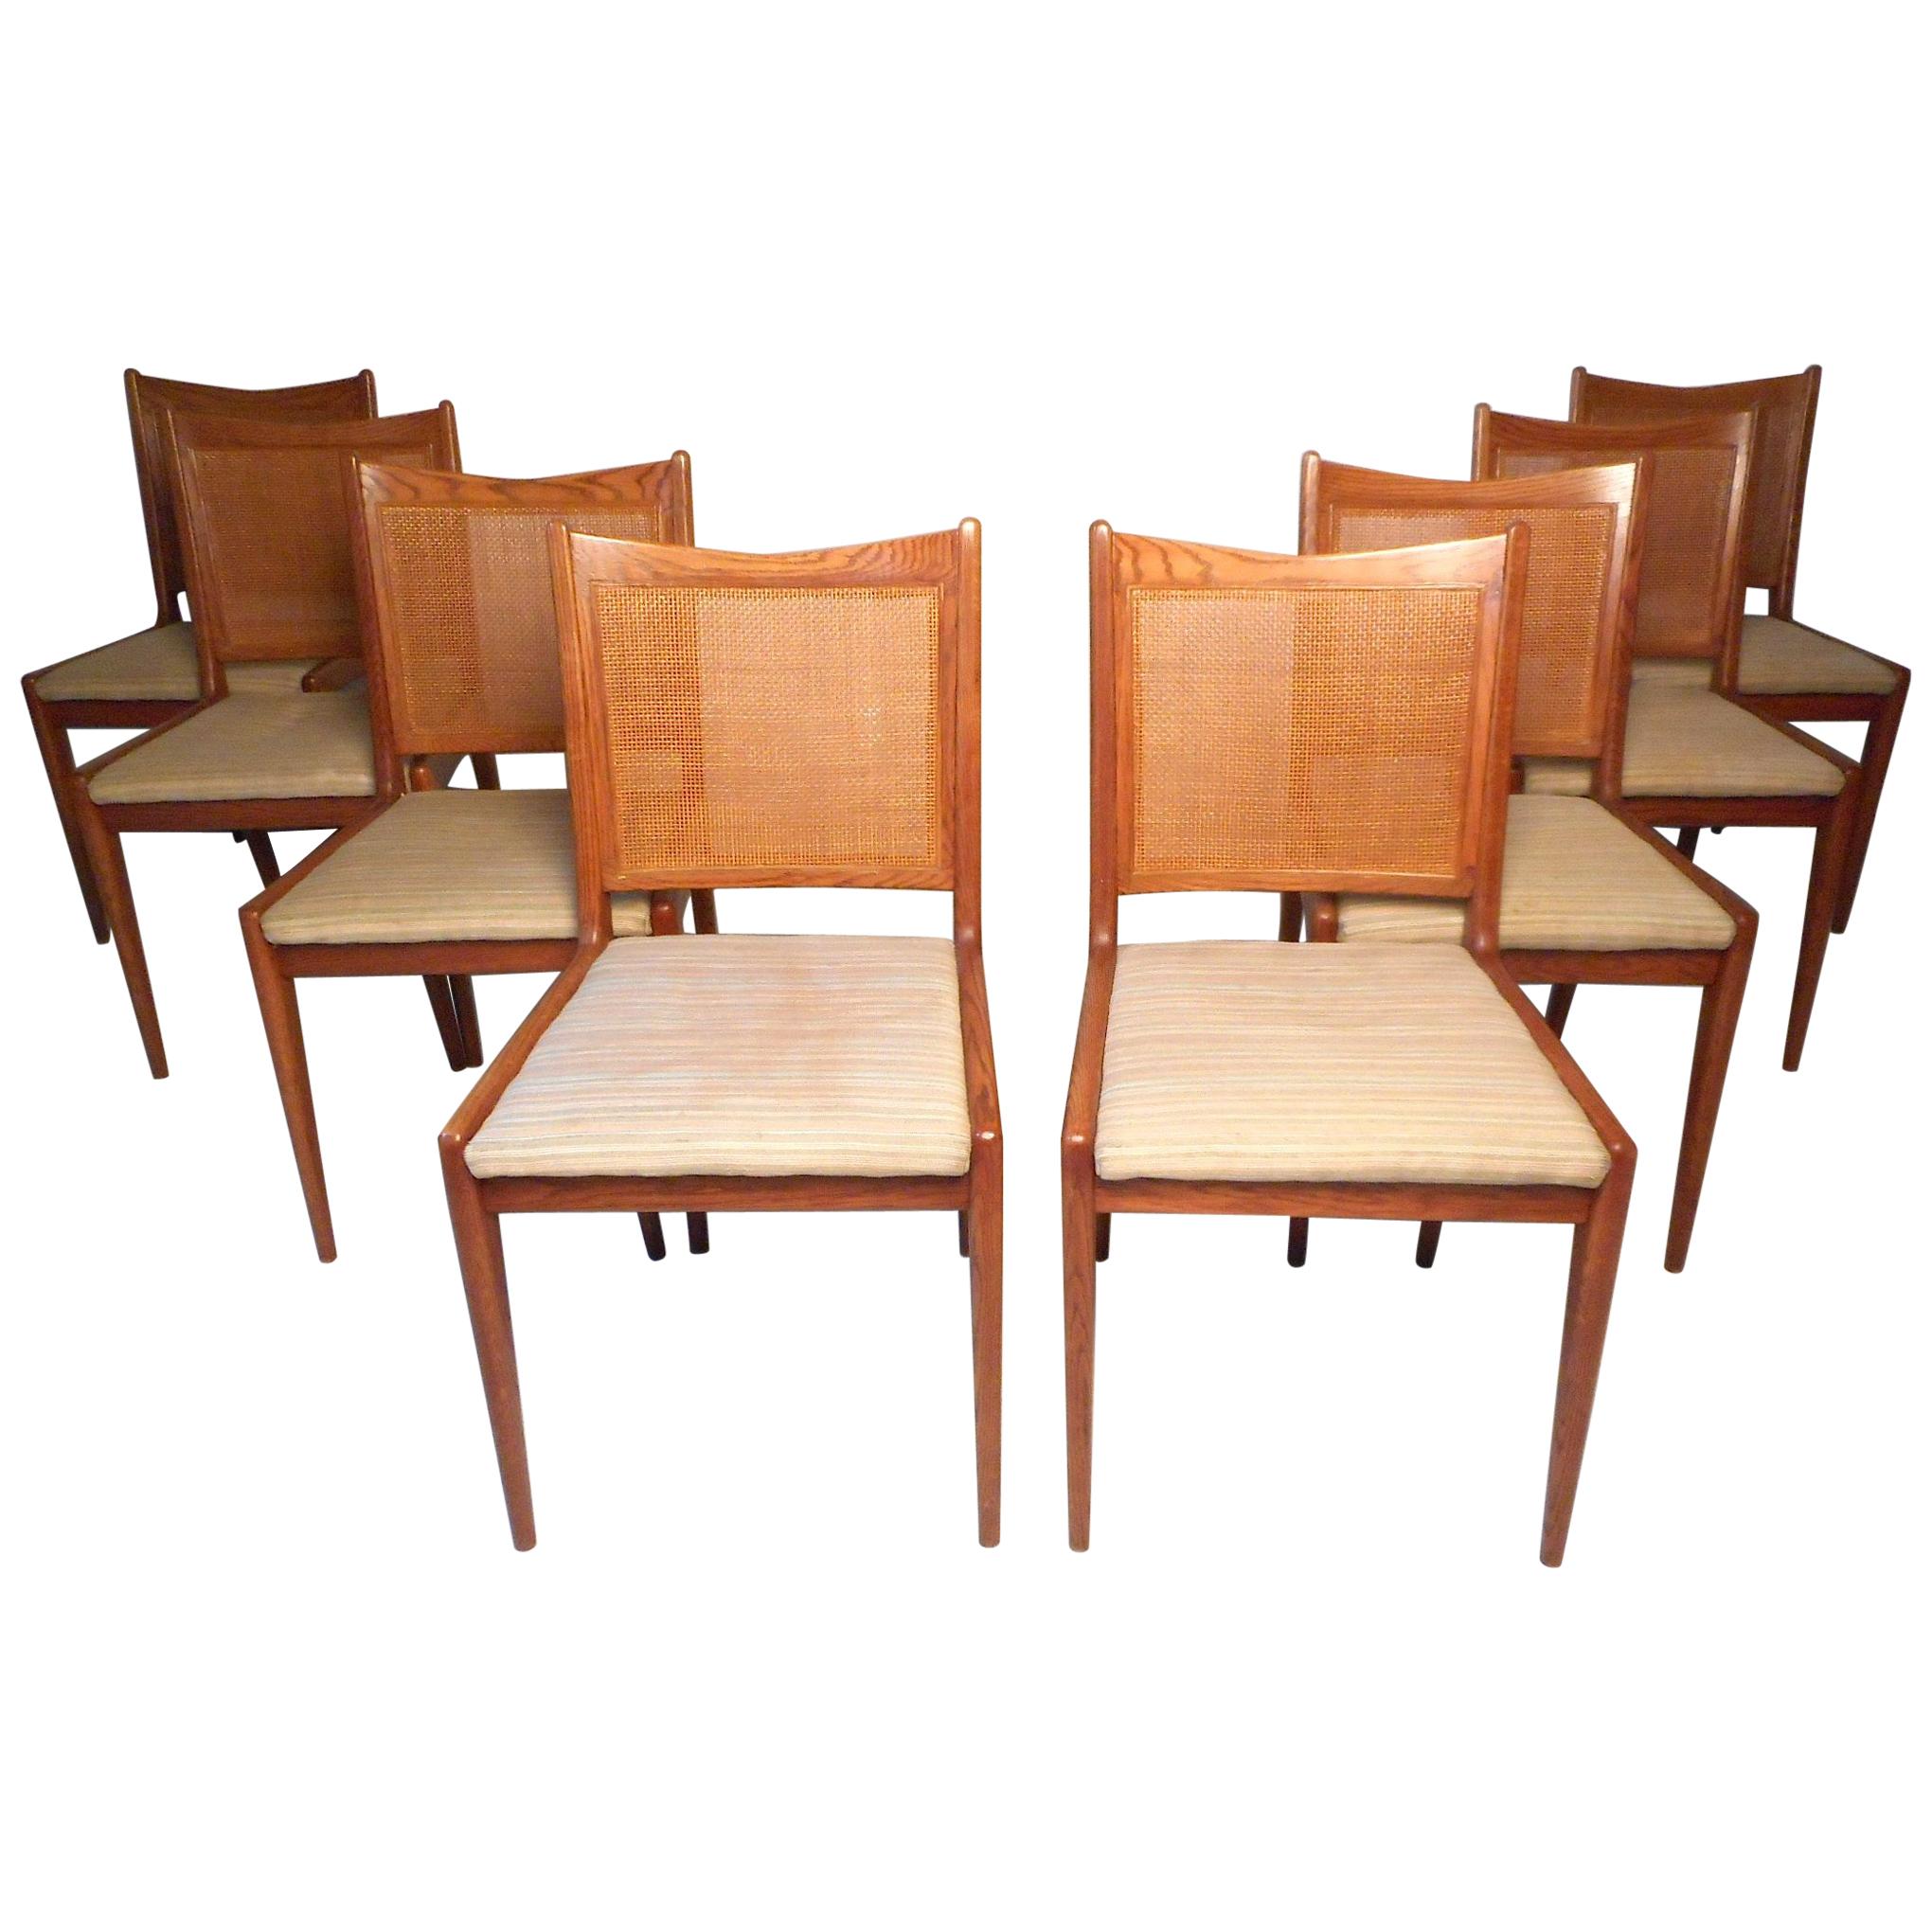 Set of 8 Midcentury Oak and Cane Dining Chairs